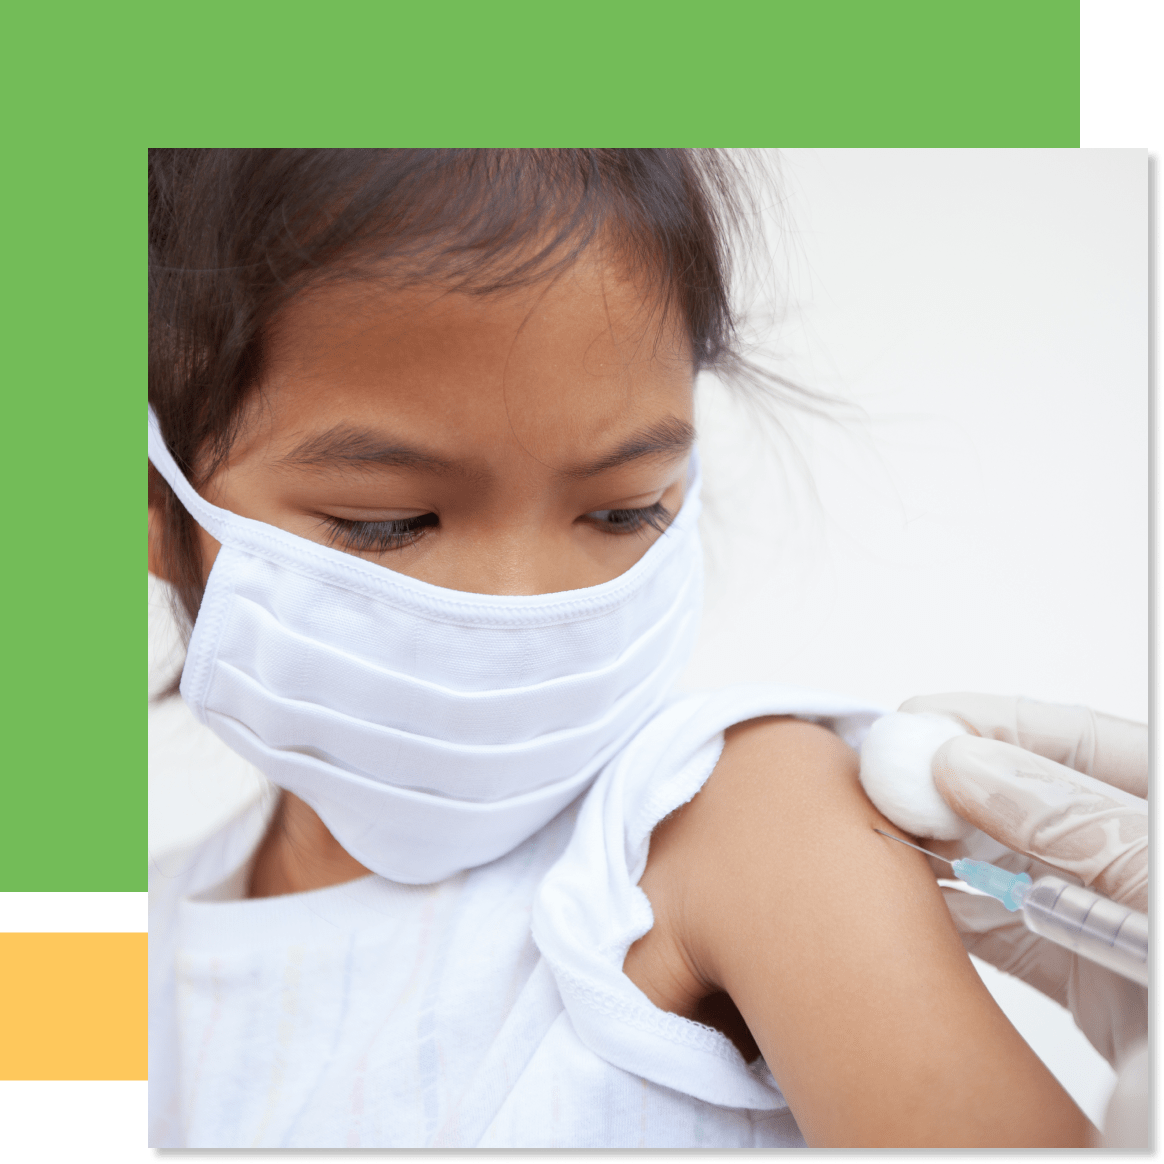 Metas solutions providing public health services to a child